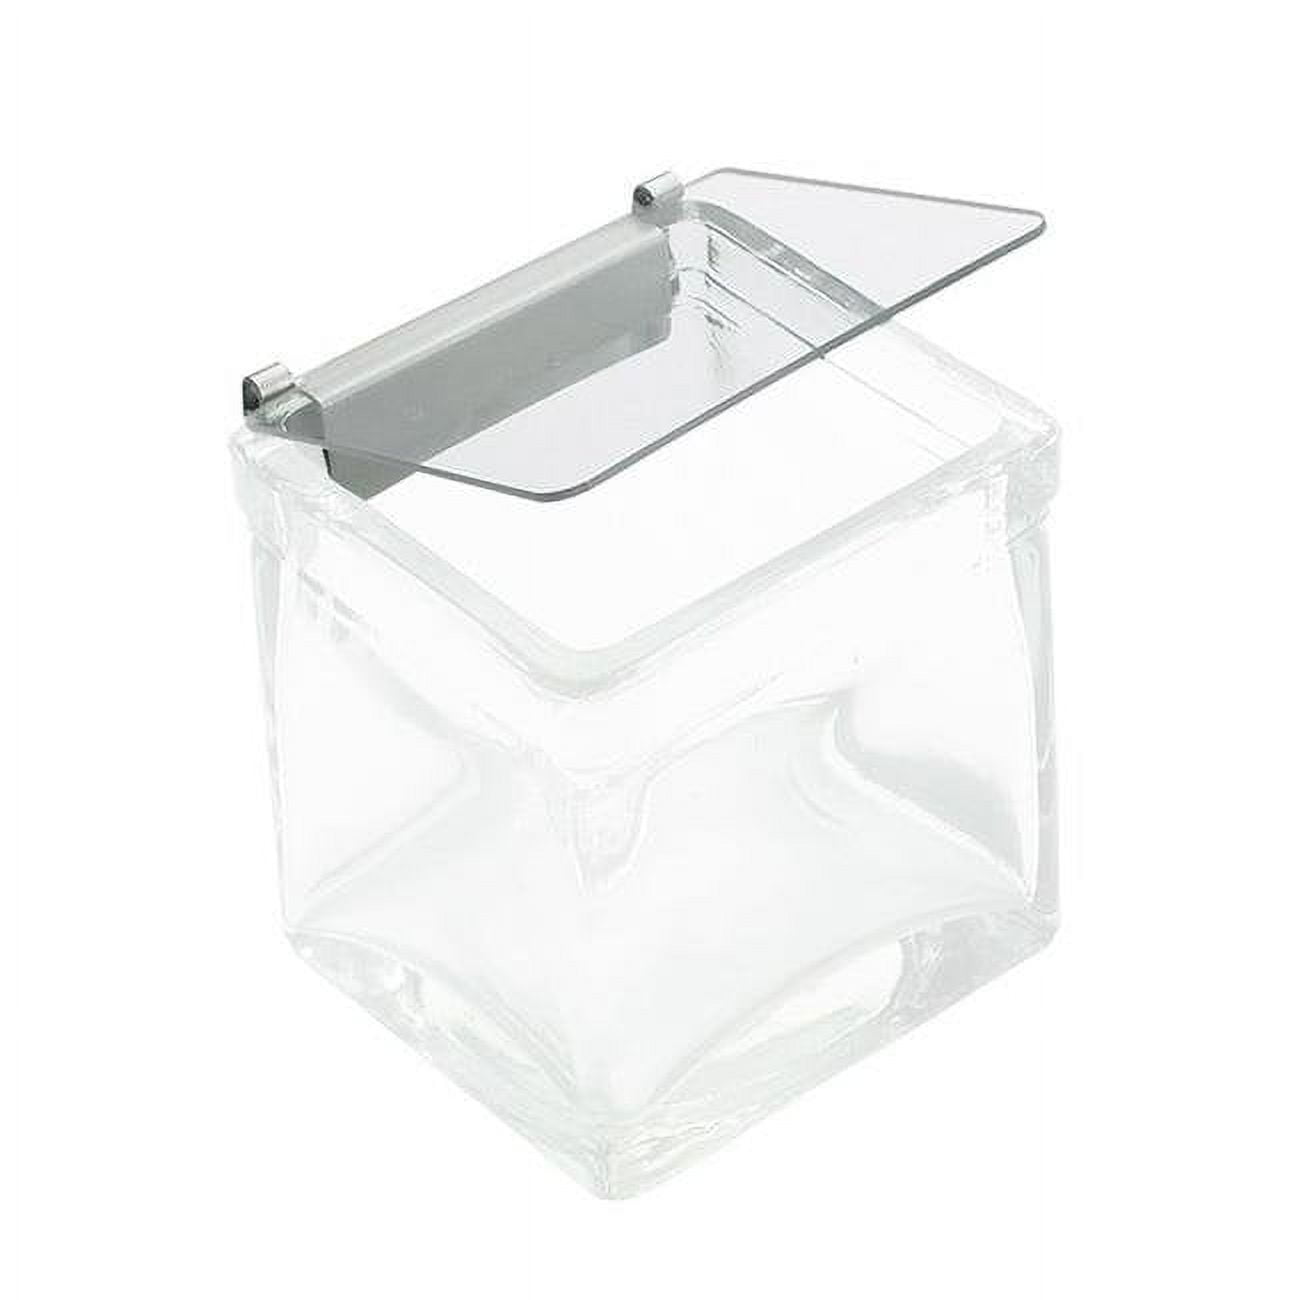 1807 Solid Plastic Lid With Stainless Steel Hinge - 4 X 4 X .5 In.